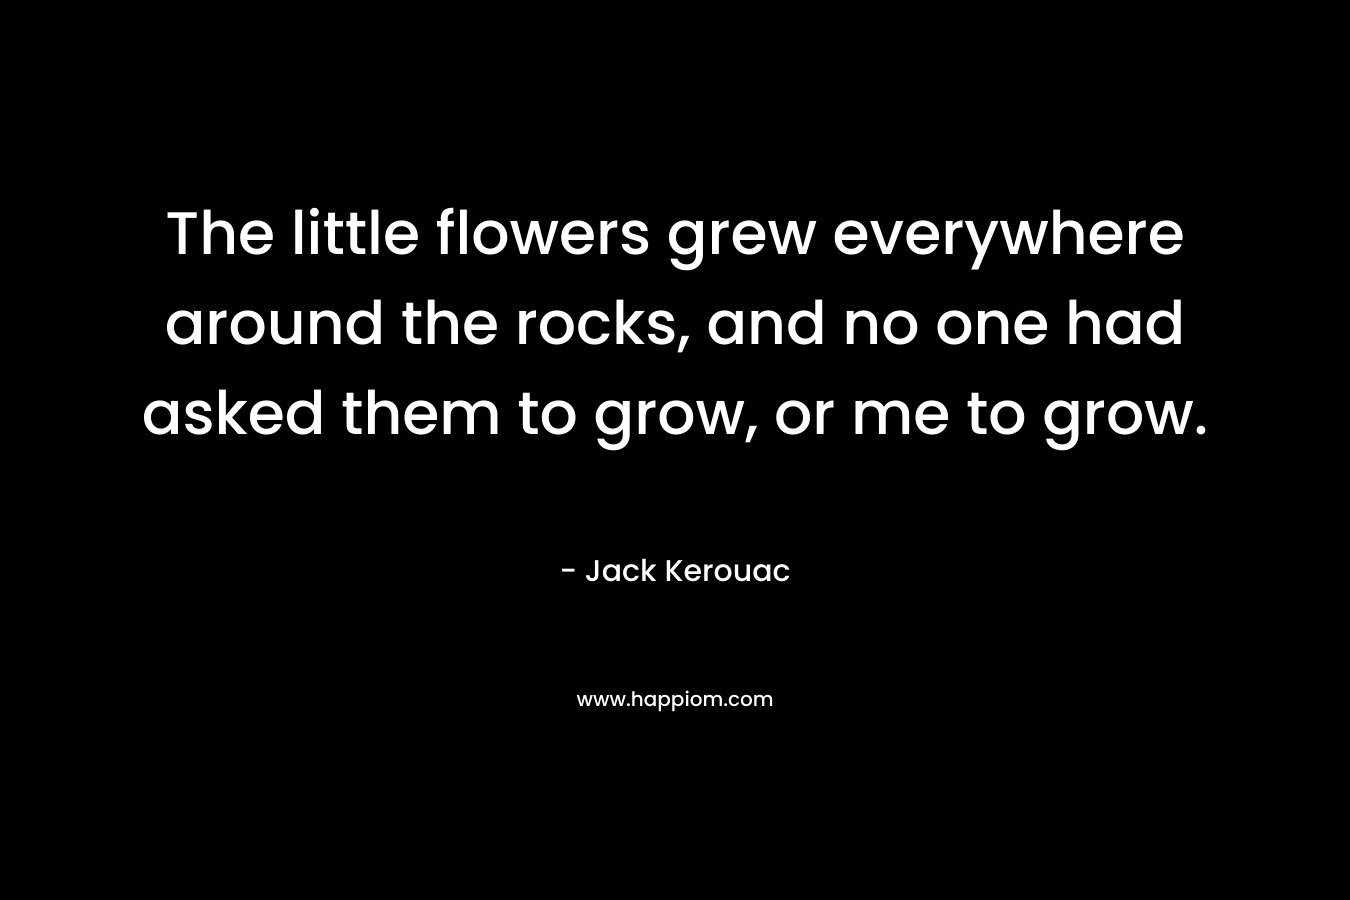 The little flowers grew everywhere around the rocks, and no one had asked them to grow, or me to grow.